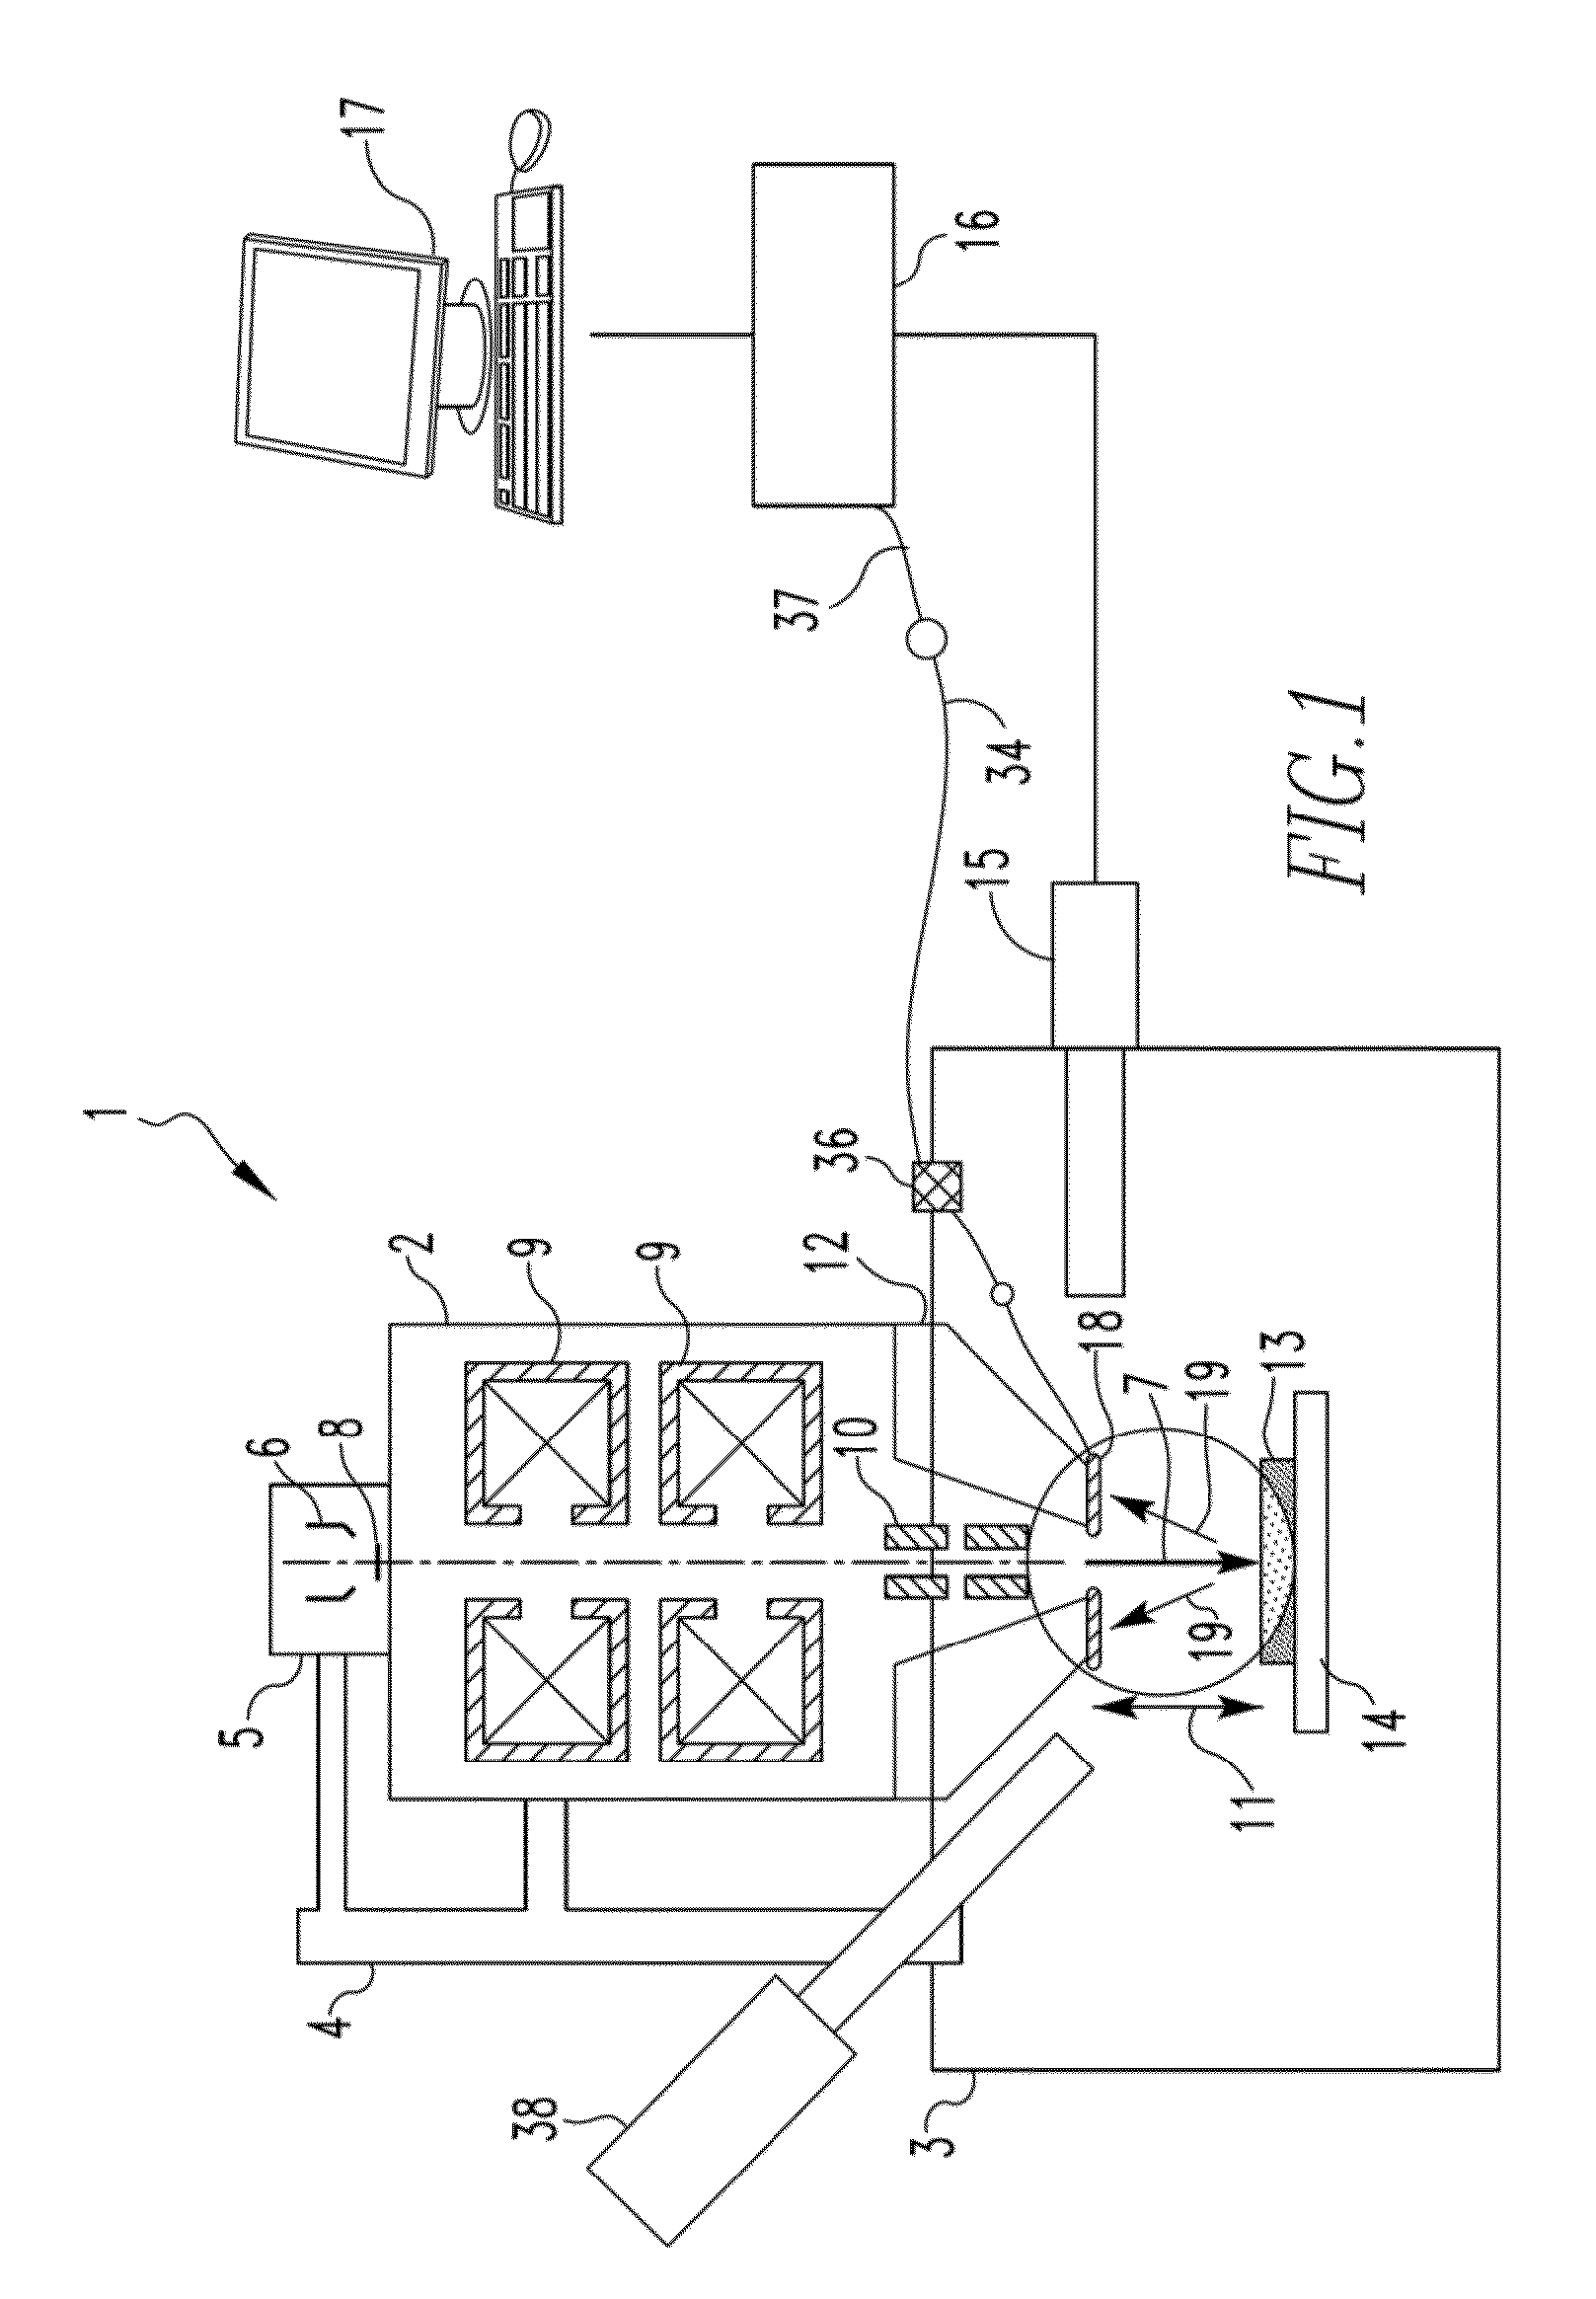 Electron detector including one or more intimately-coupled scintillator-photomultiplier combinations, and electron microscope employing same